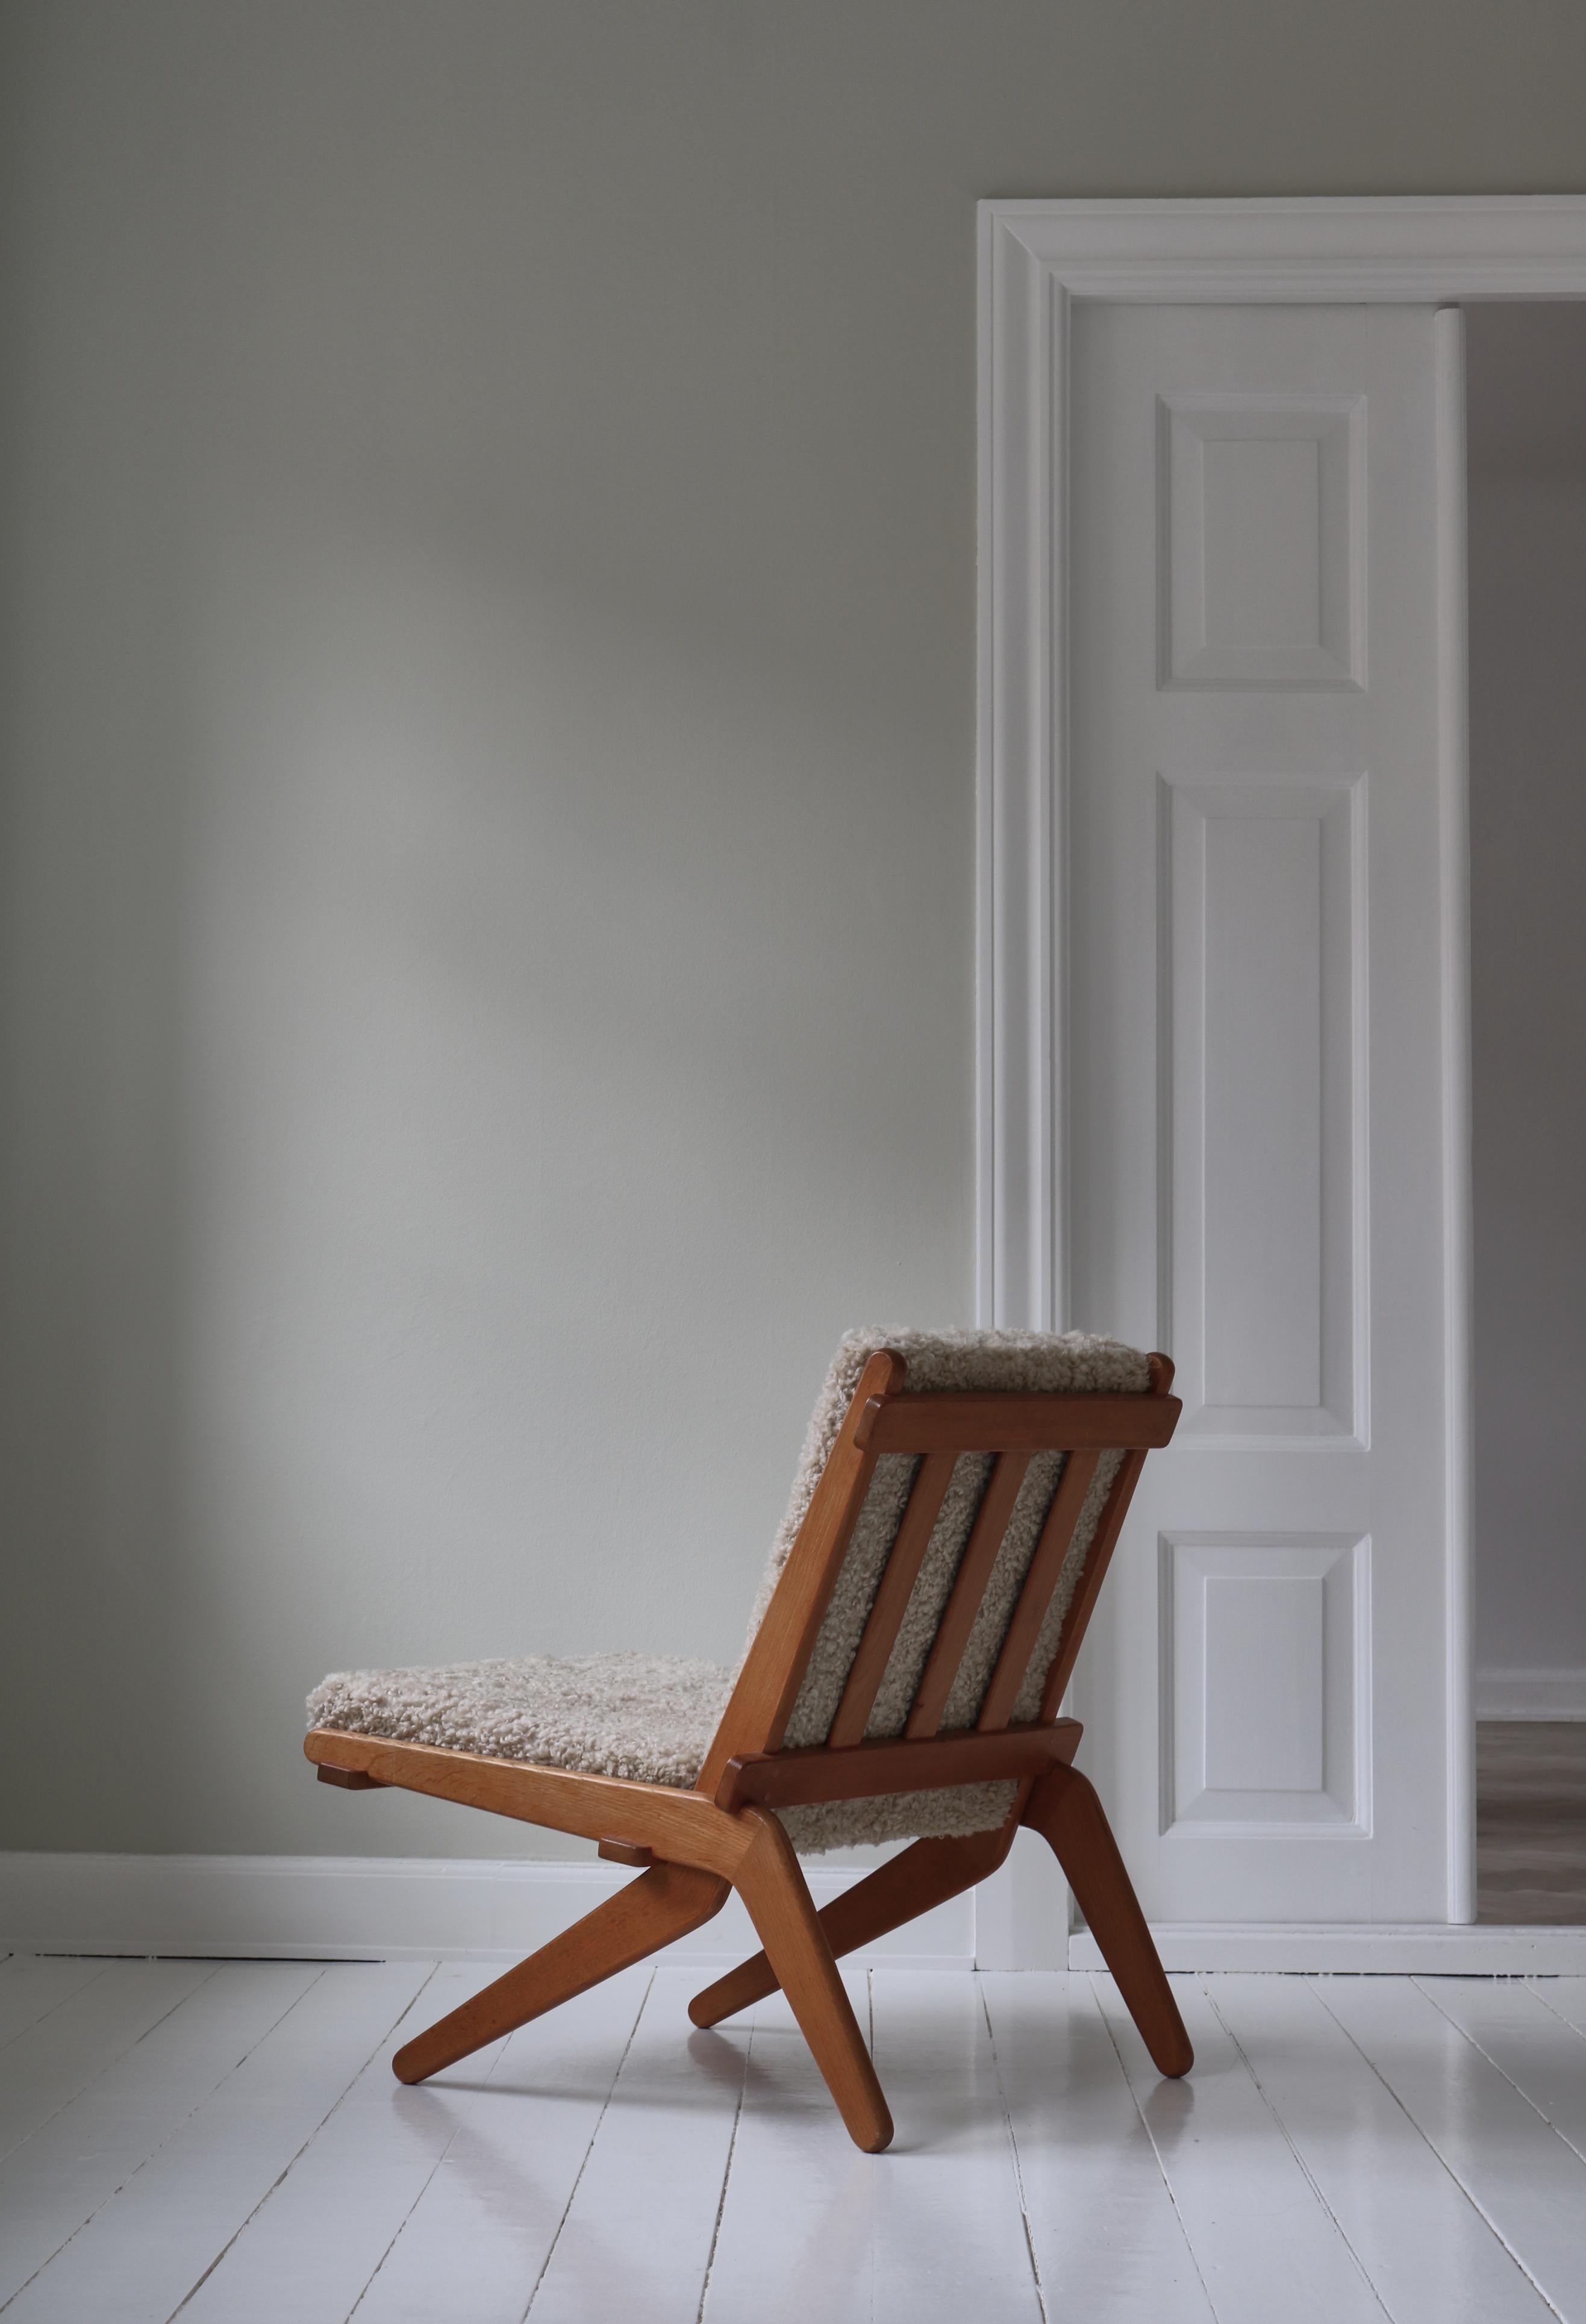 Rare and iconic Danish scissor folding chair in solid oak by Preben Thorsen for cabinetmaker Morten Olsen & Son. This chair was made in very limited numbers in 1957 and is a very rare find. The design is brilliant and ingenious as the chair consists